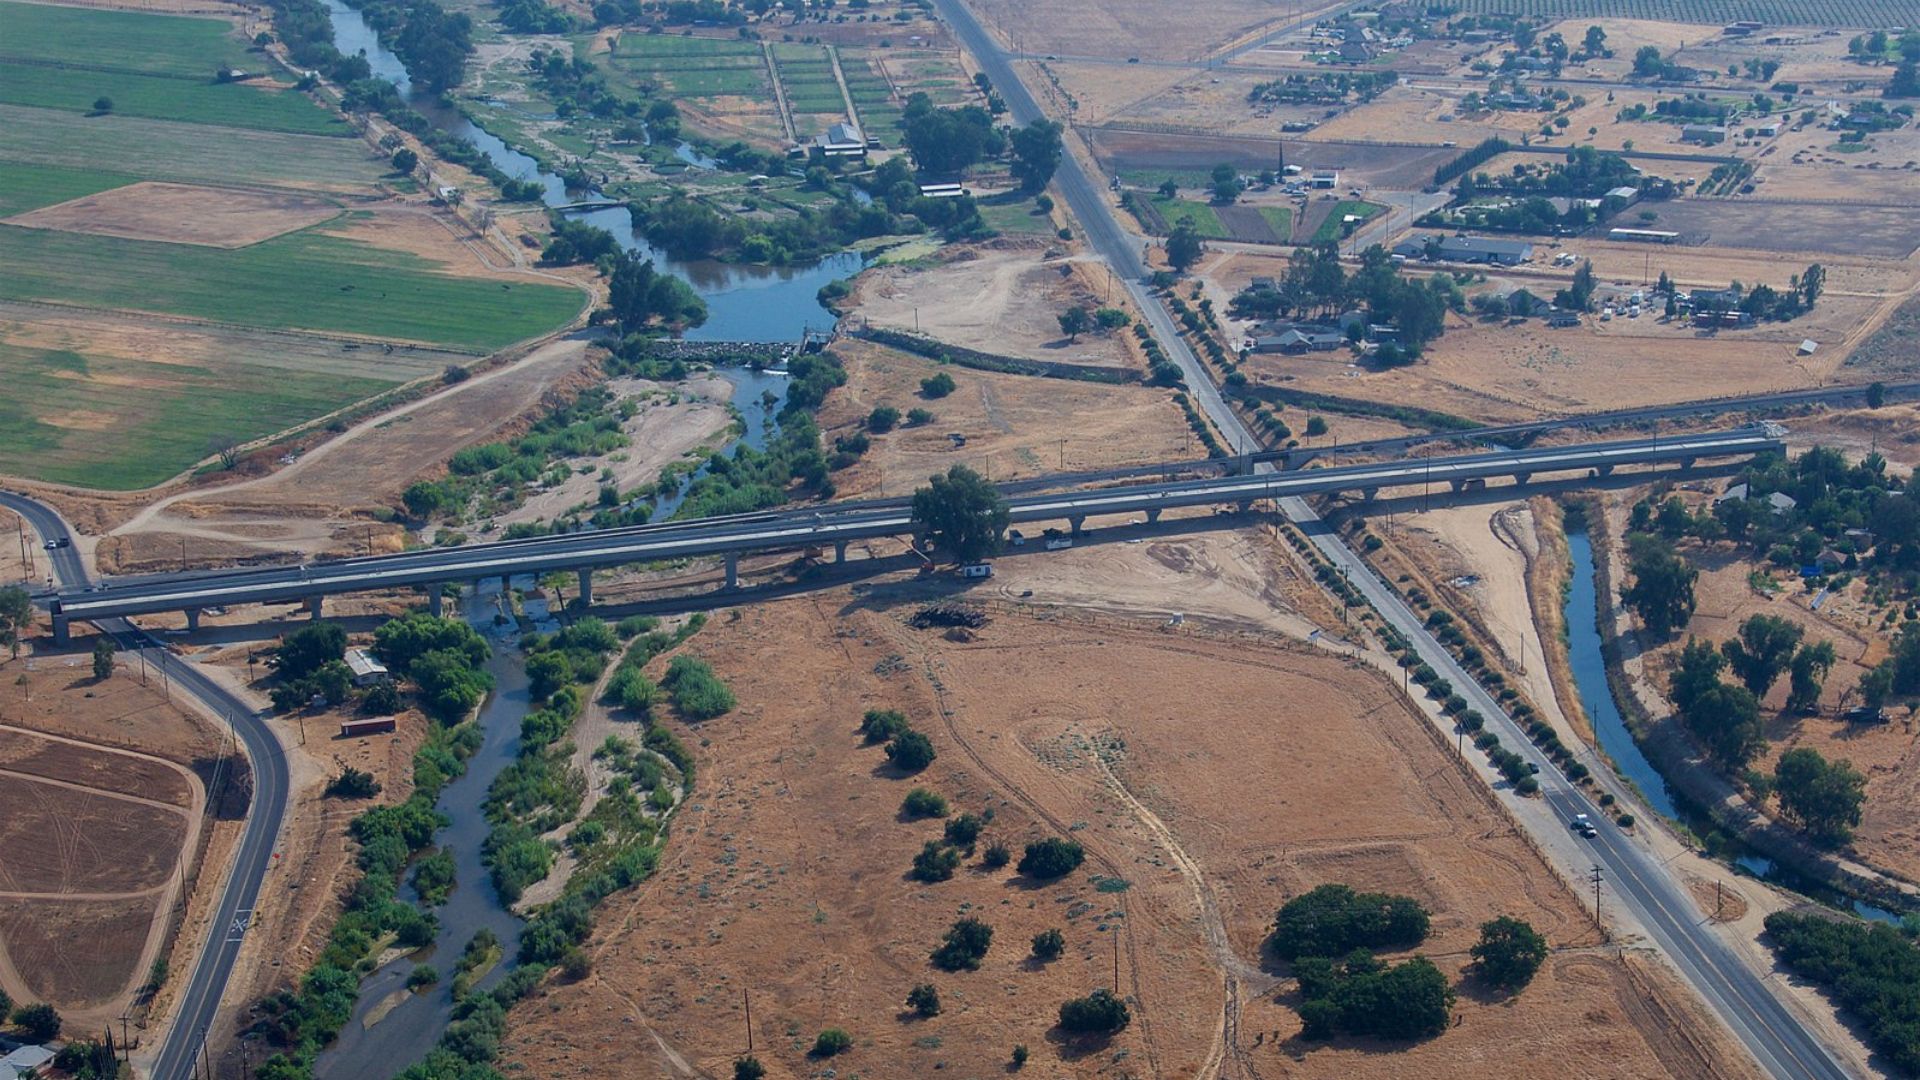 <p>The California High-Speed Rail Authority has attempted to maintain a positive outlook, <a href="https://nypost.com/2024/05/04/us-news/california-mocked-over-high-speed-rail-bridge-to-nowhere-that-took-9-years-to-build/">emphasizing</a> that the Fresno River Viaduct is among the first completed high-speed rail structures in the state.  </p> <p>This statement aims to highlight a milestone in the long-delayed project.  </p>